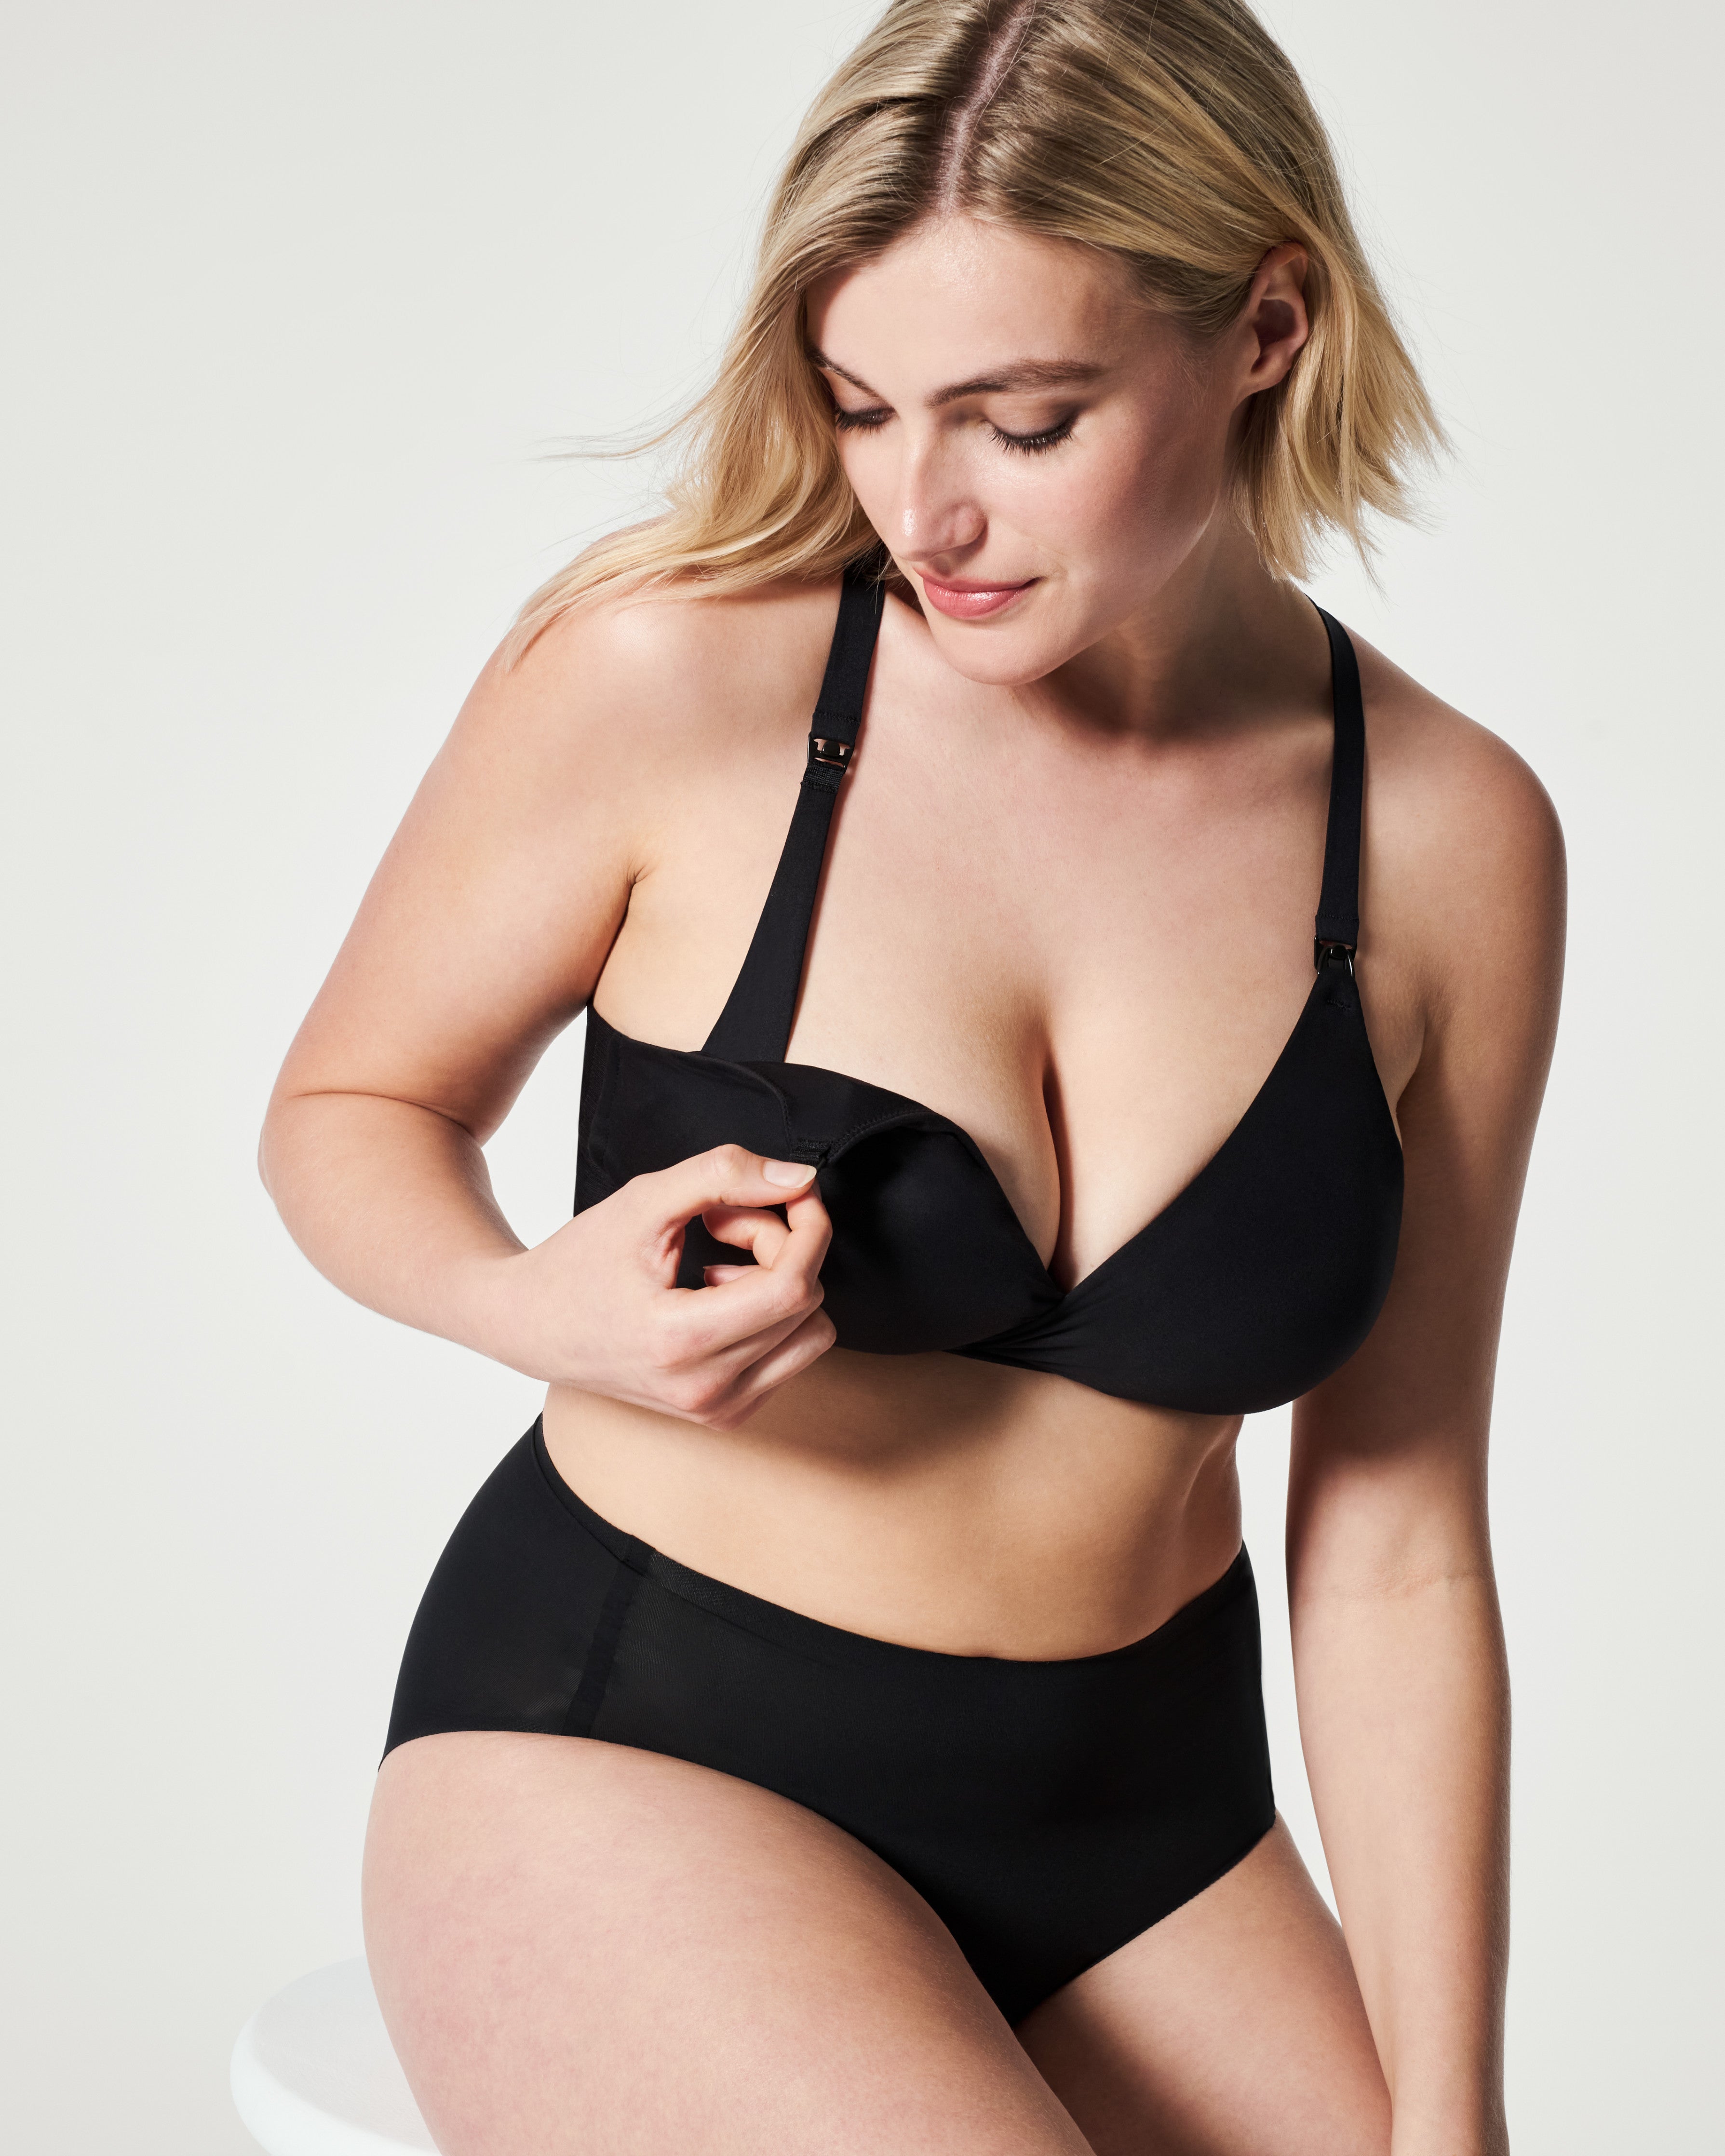 Underwear As Outerwear: The Bra Trend Taking Us By Storm - The Mom Edit